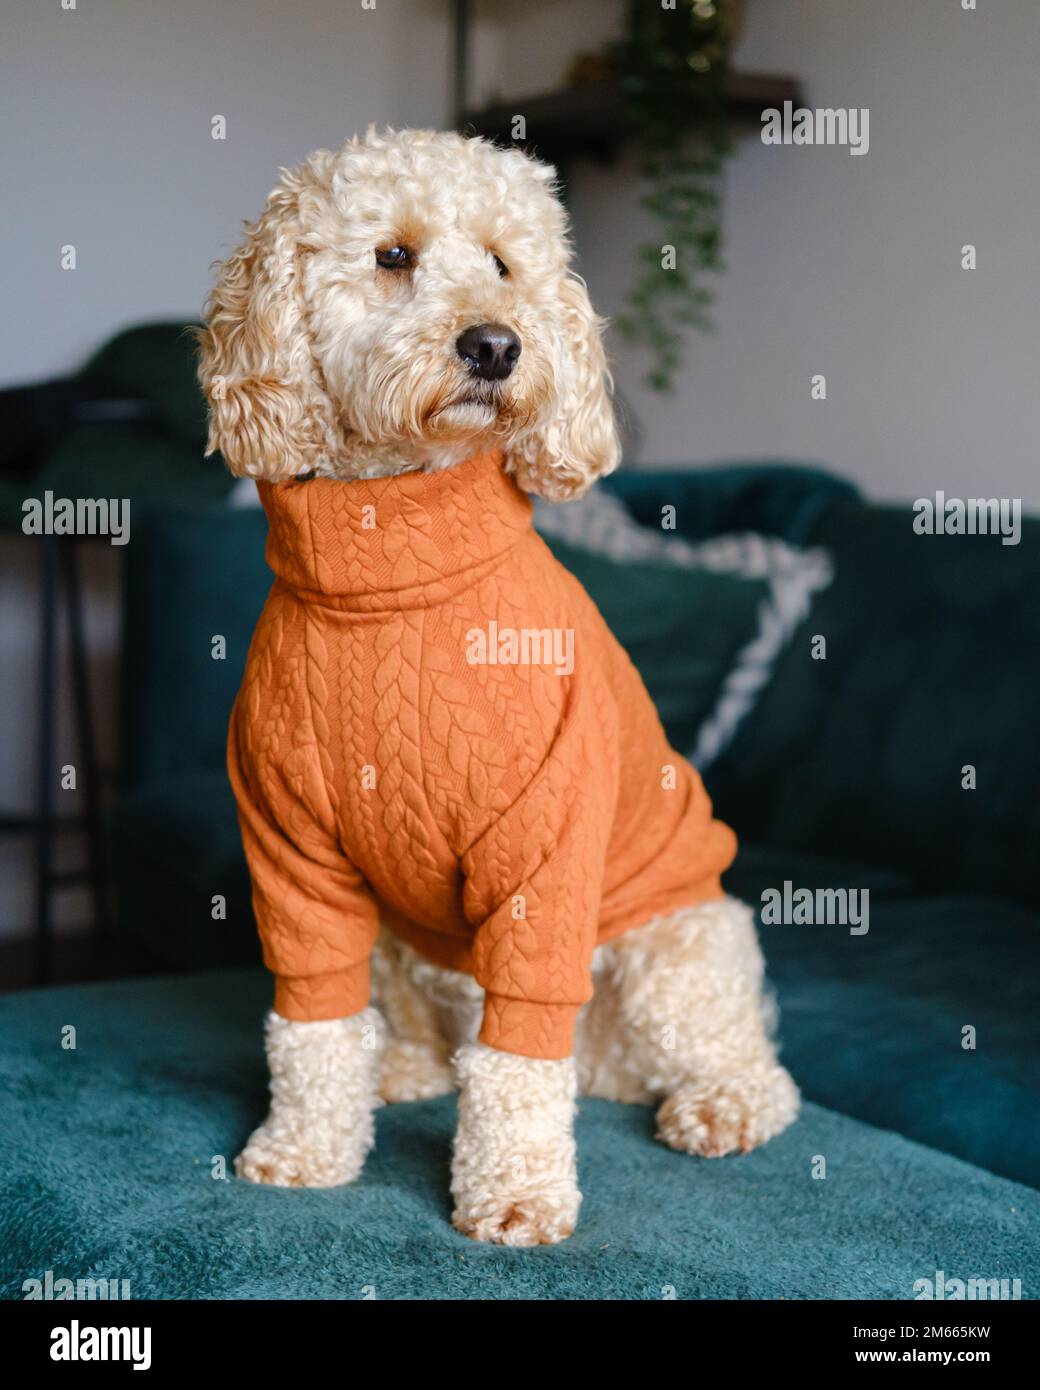 Cockapoo Dog standing on green couch wearing an orange winter jumper Stock Photo